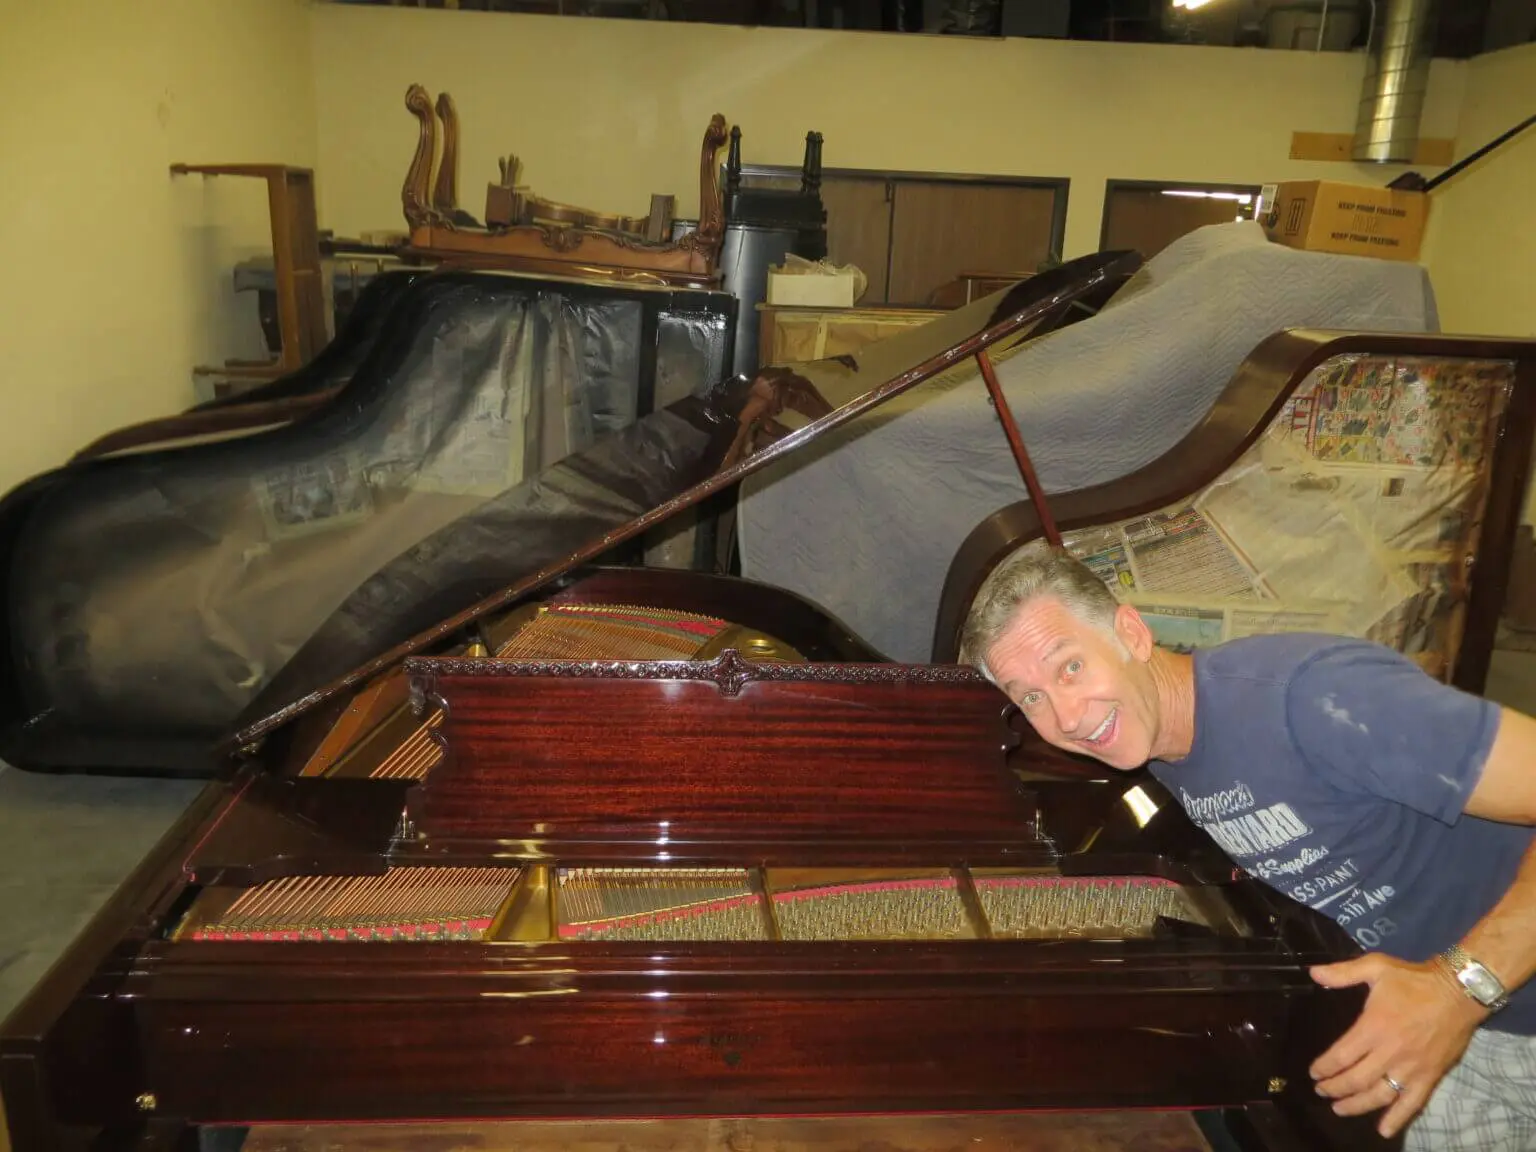 A man is working on an old piano.